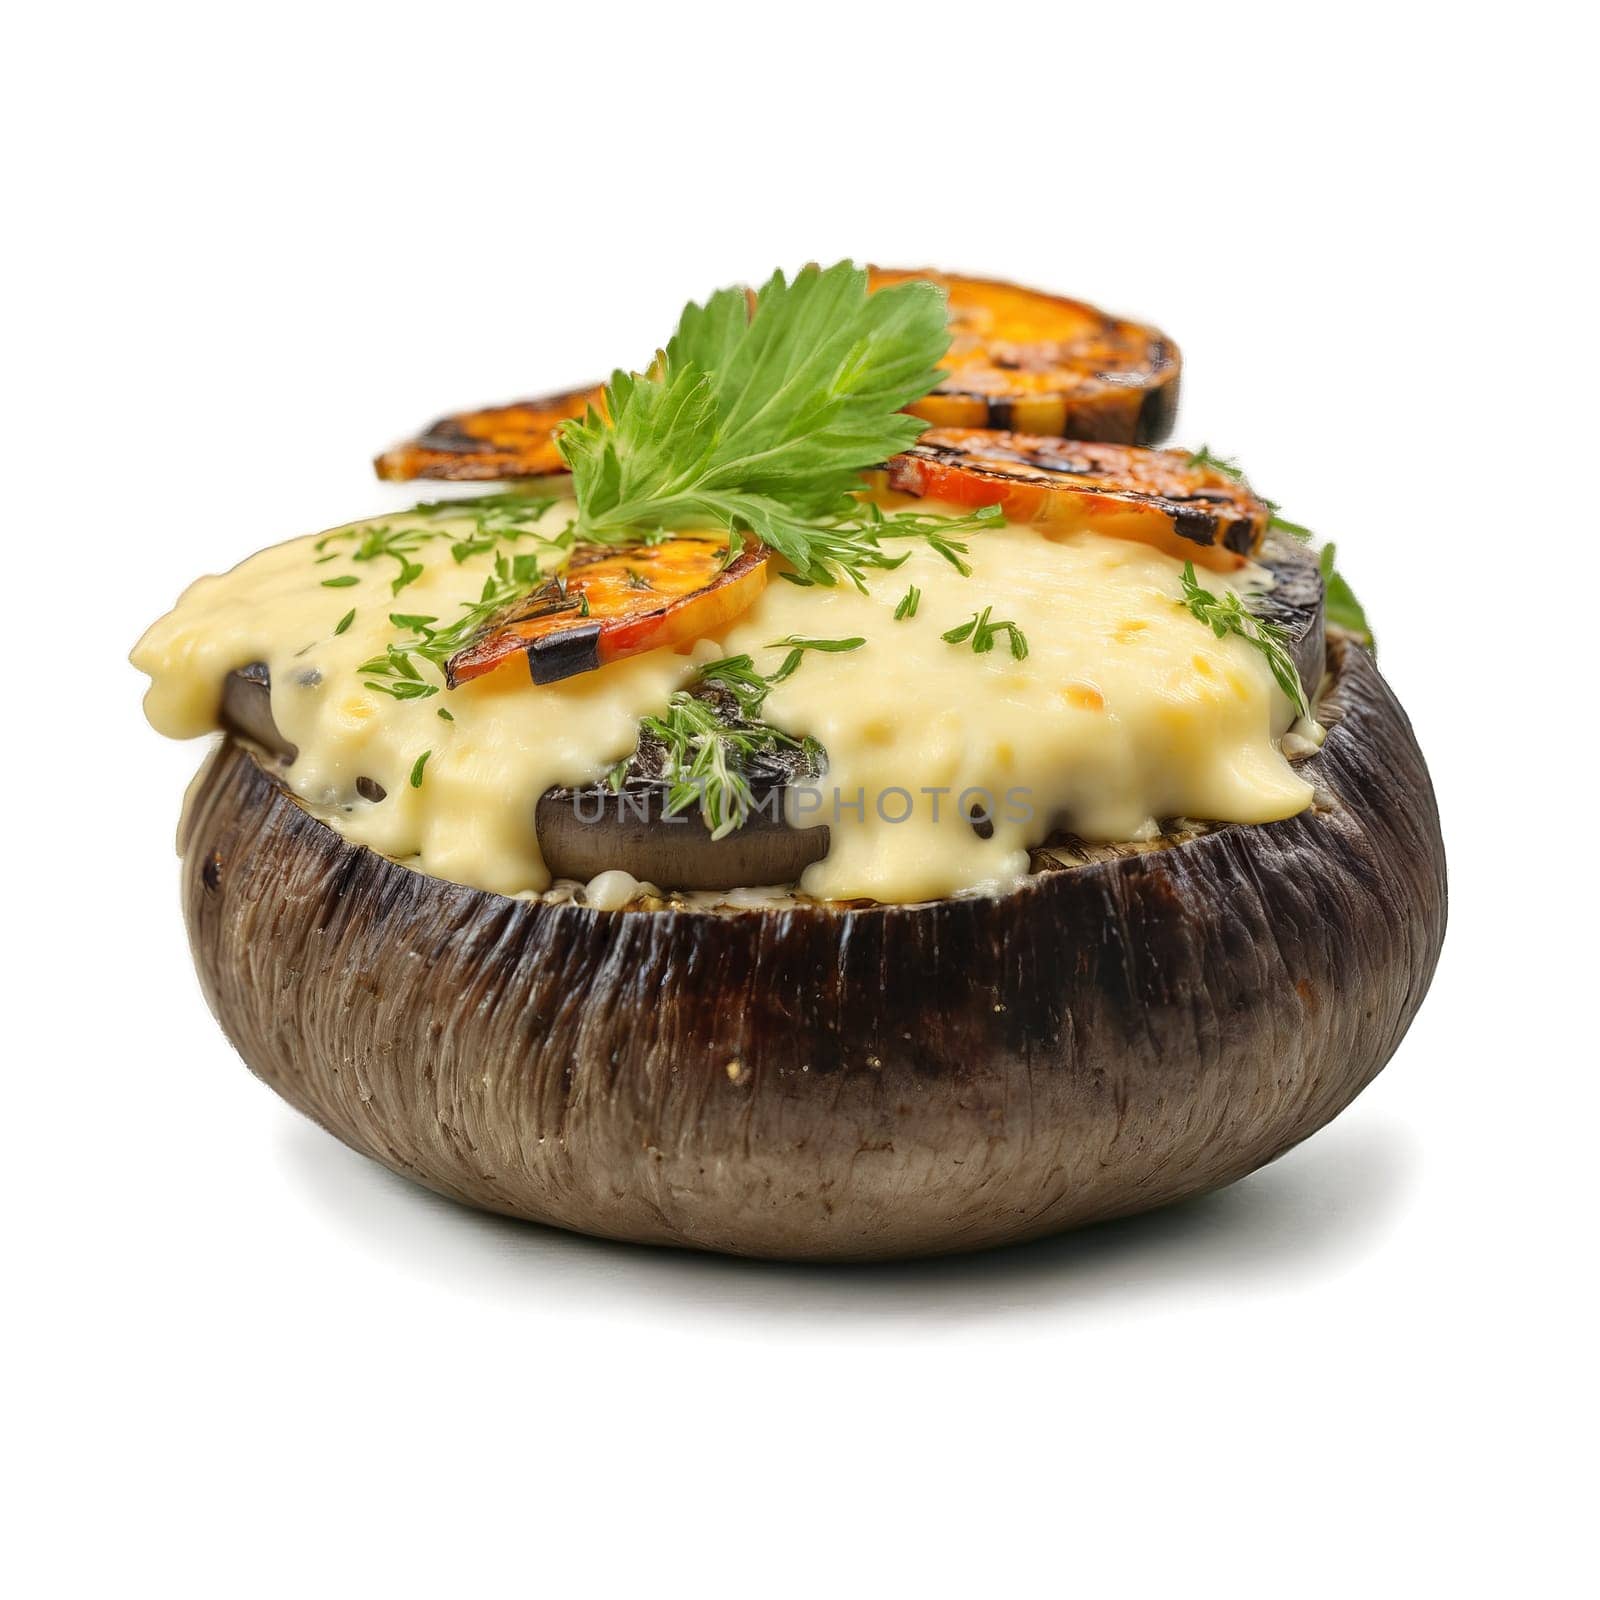 Grilled portobello mushroom cap stuffed with herbs and cheese Summer food concept Final image should. close-up food, isolated on transparent background